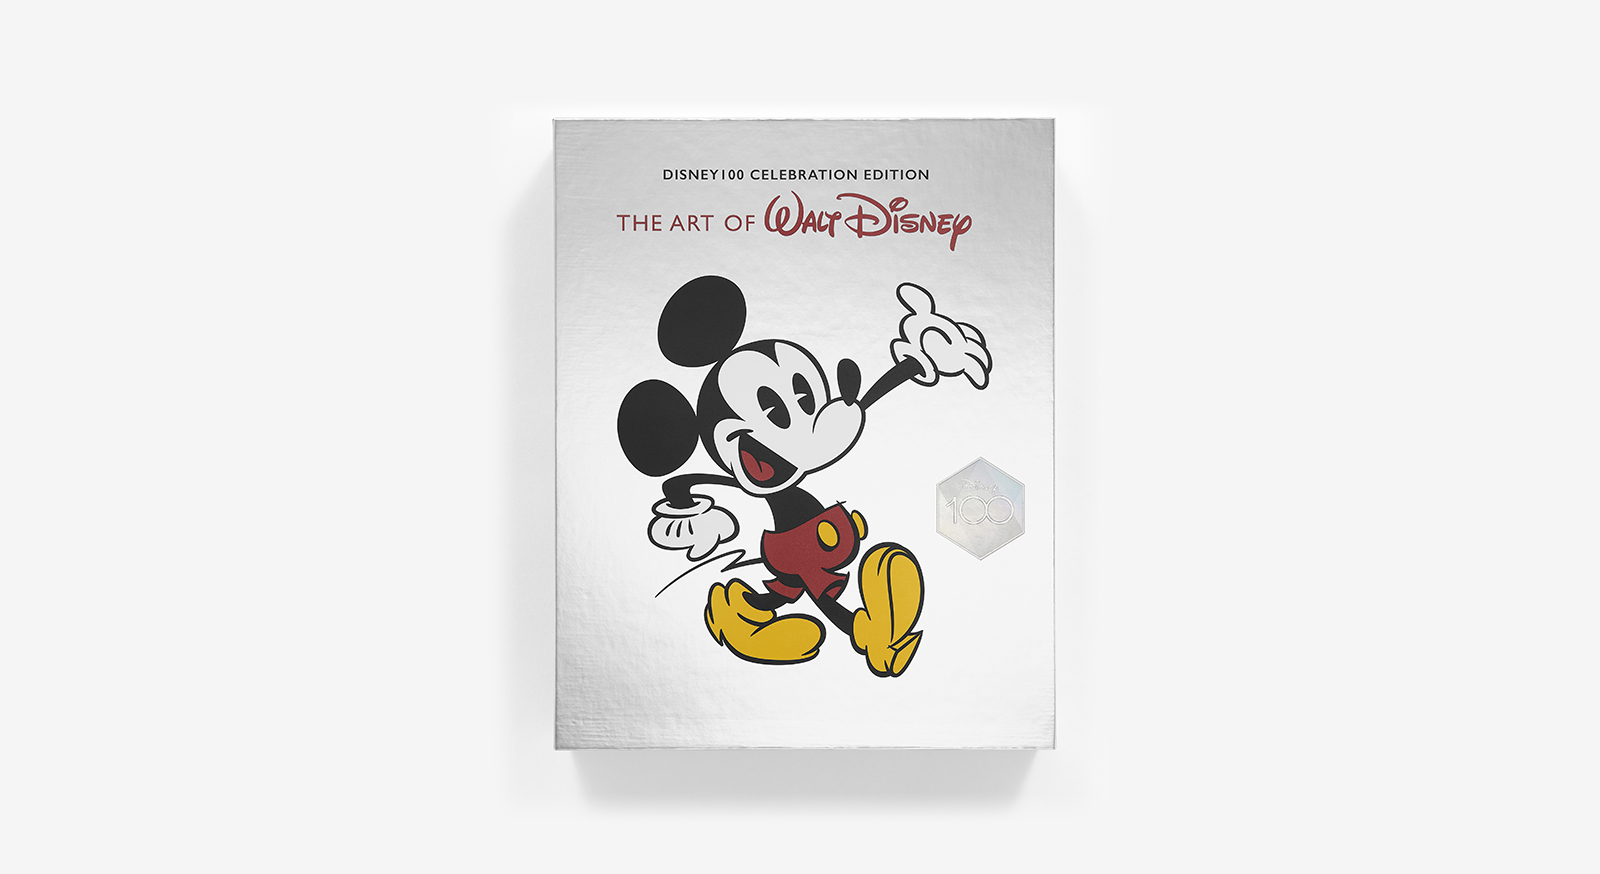 The Art of Walt Disney: From Mickey Mouse to the Magic Kingdoms and Beyond (Disney  100 Celebration Edition) (Hardcover)